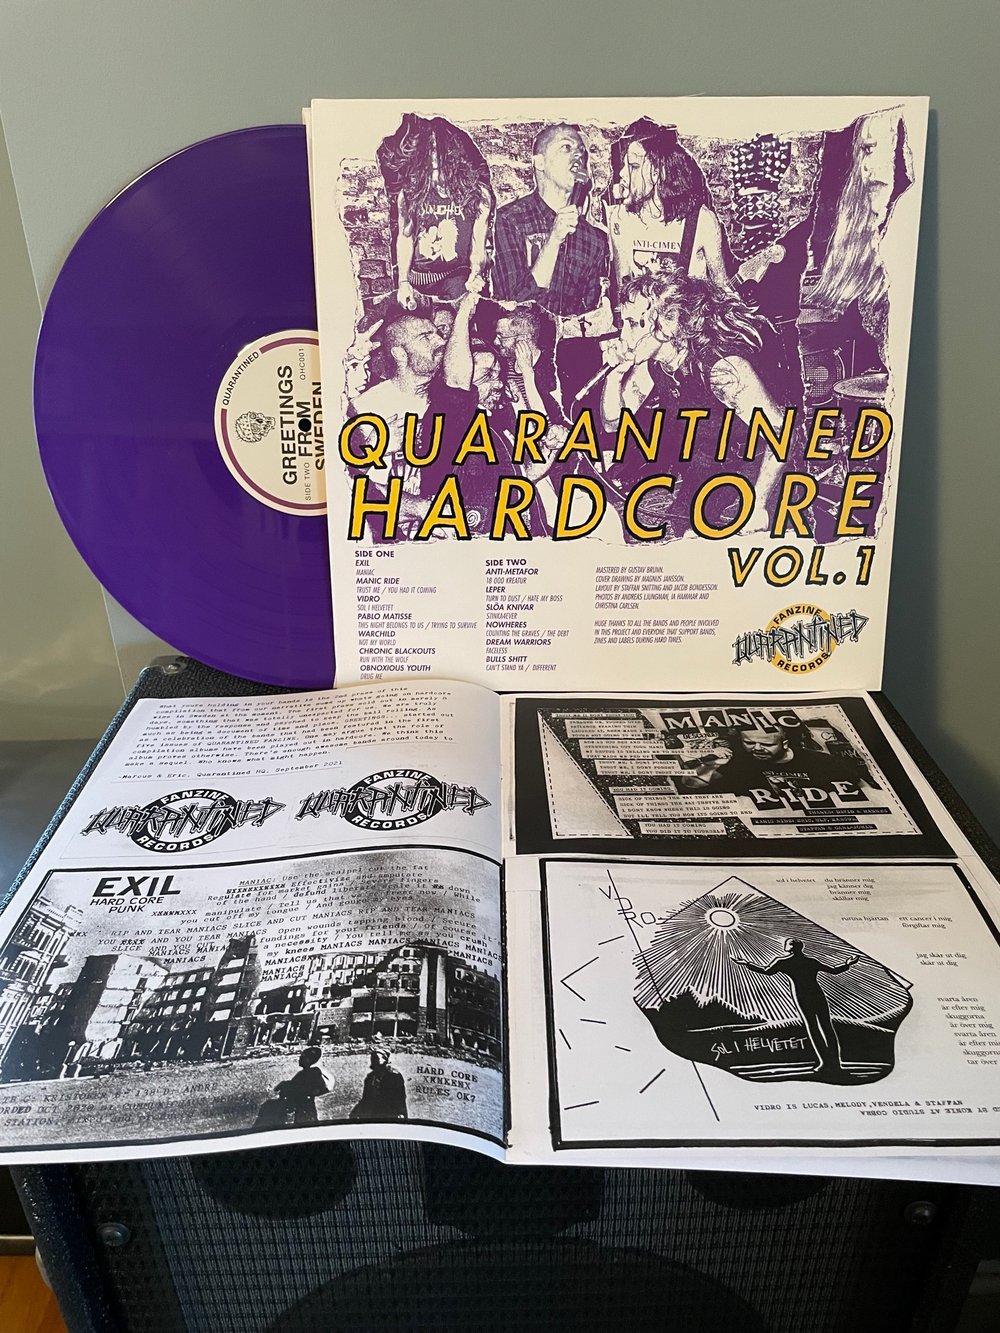 GREETINGS FROM SWEDEN "Quarantined Hardcore Vol 1" LP